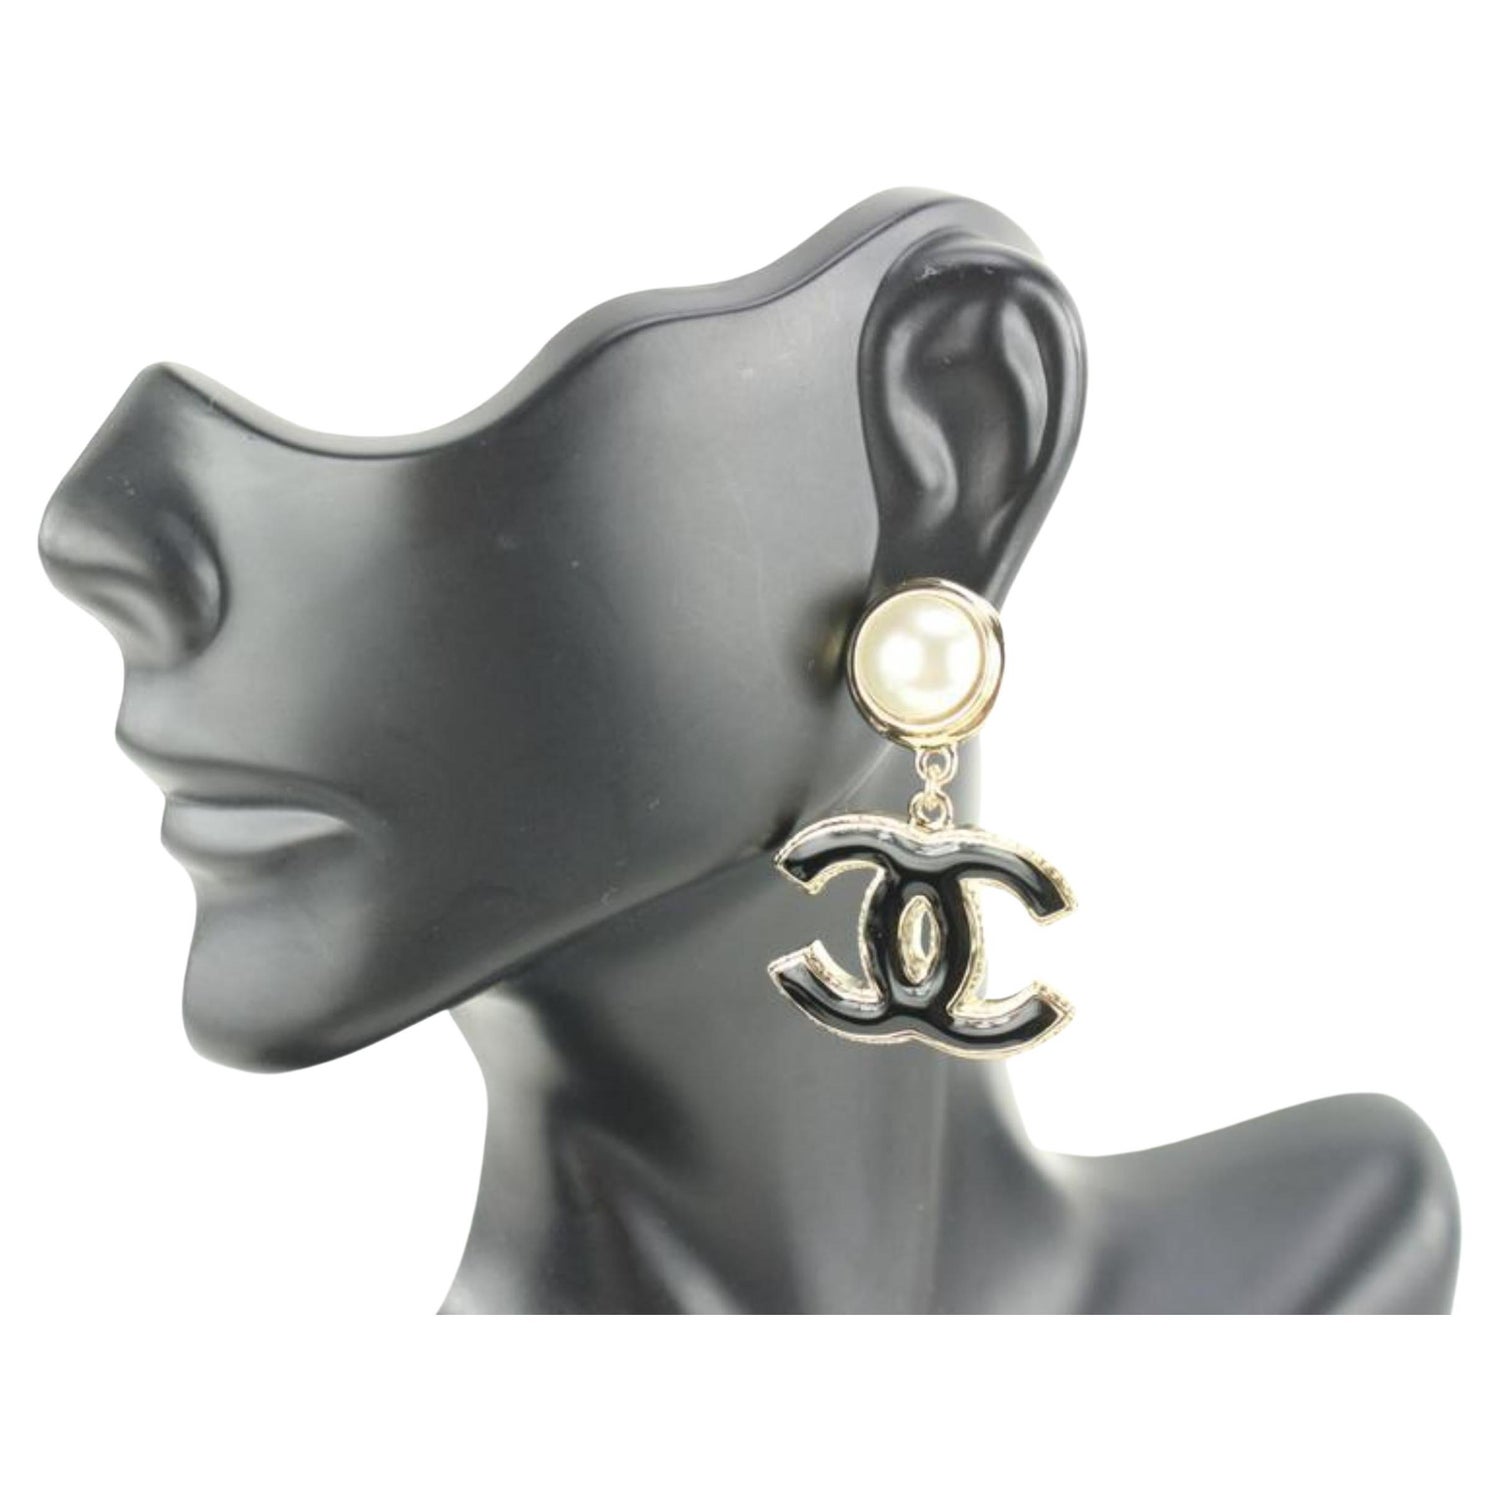 Chanel Metal Obazine CC Earrings Gold in Gold Metal with Gold-tone - US